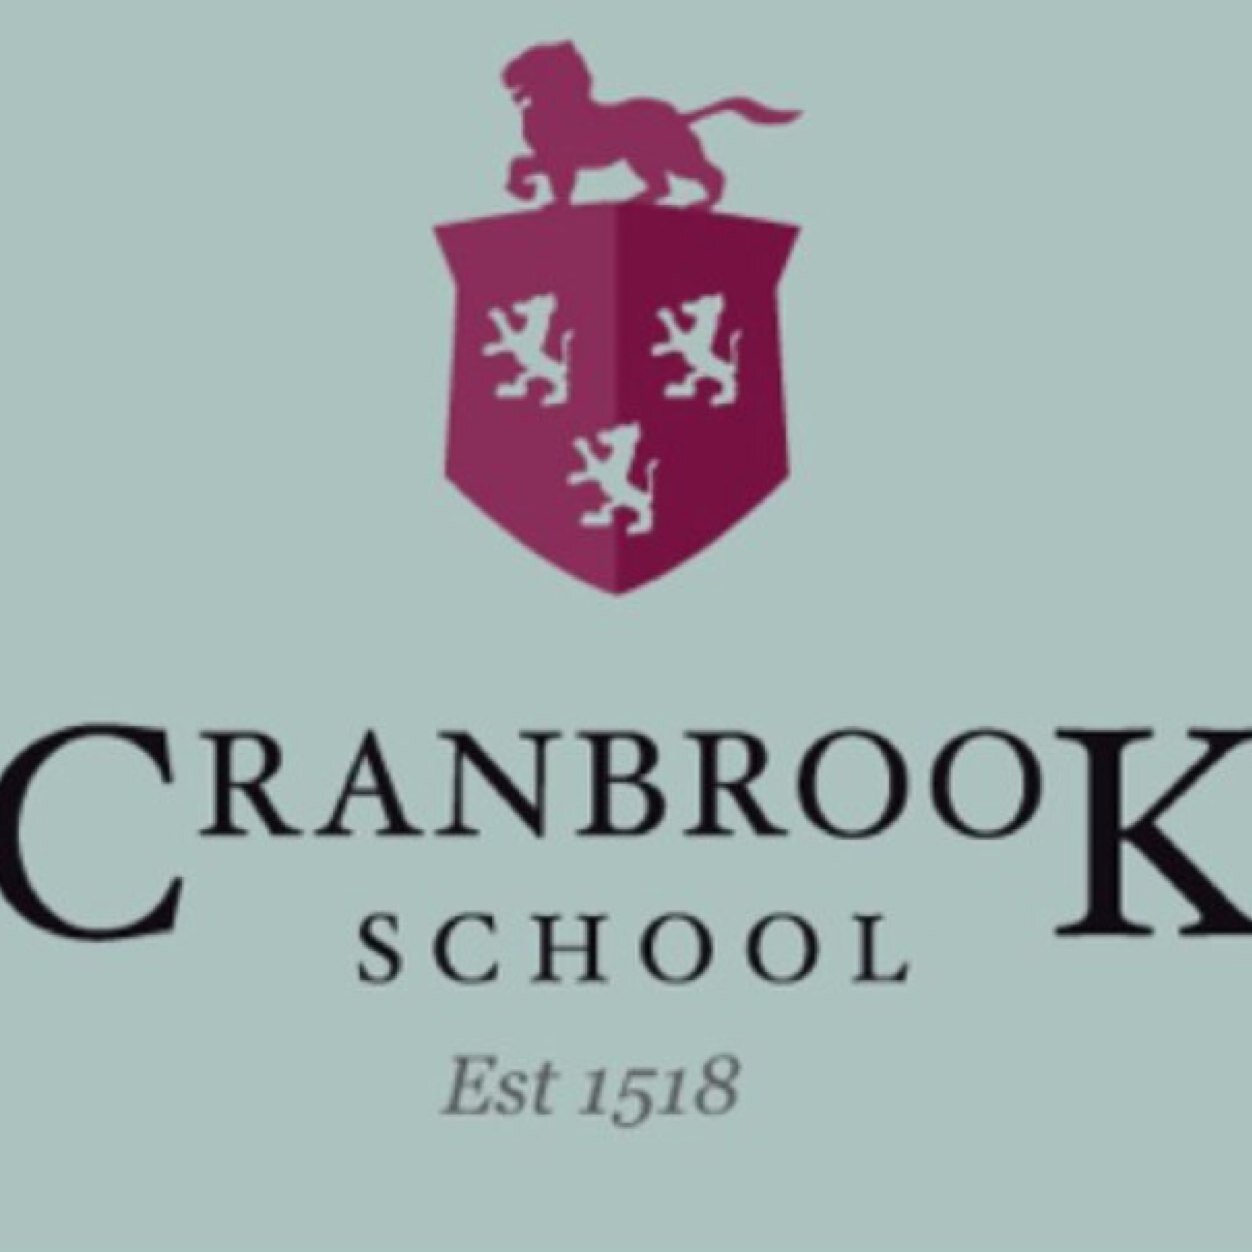 The official Twitter account for Cranbrook School Cricket.